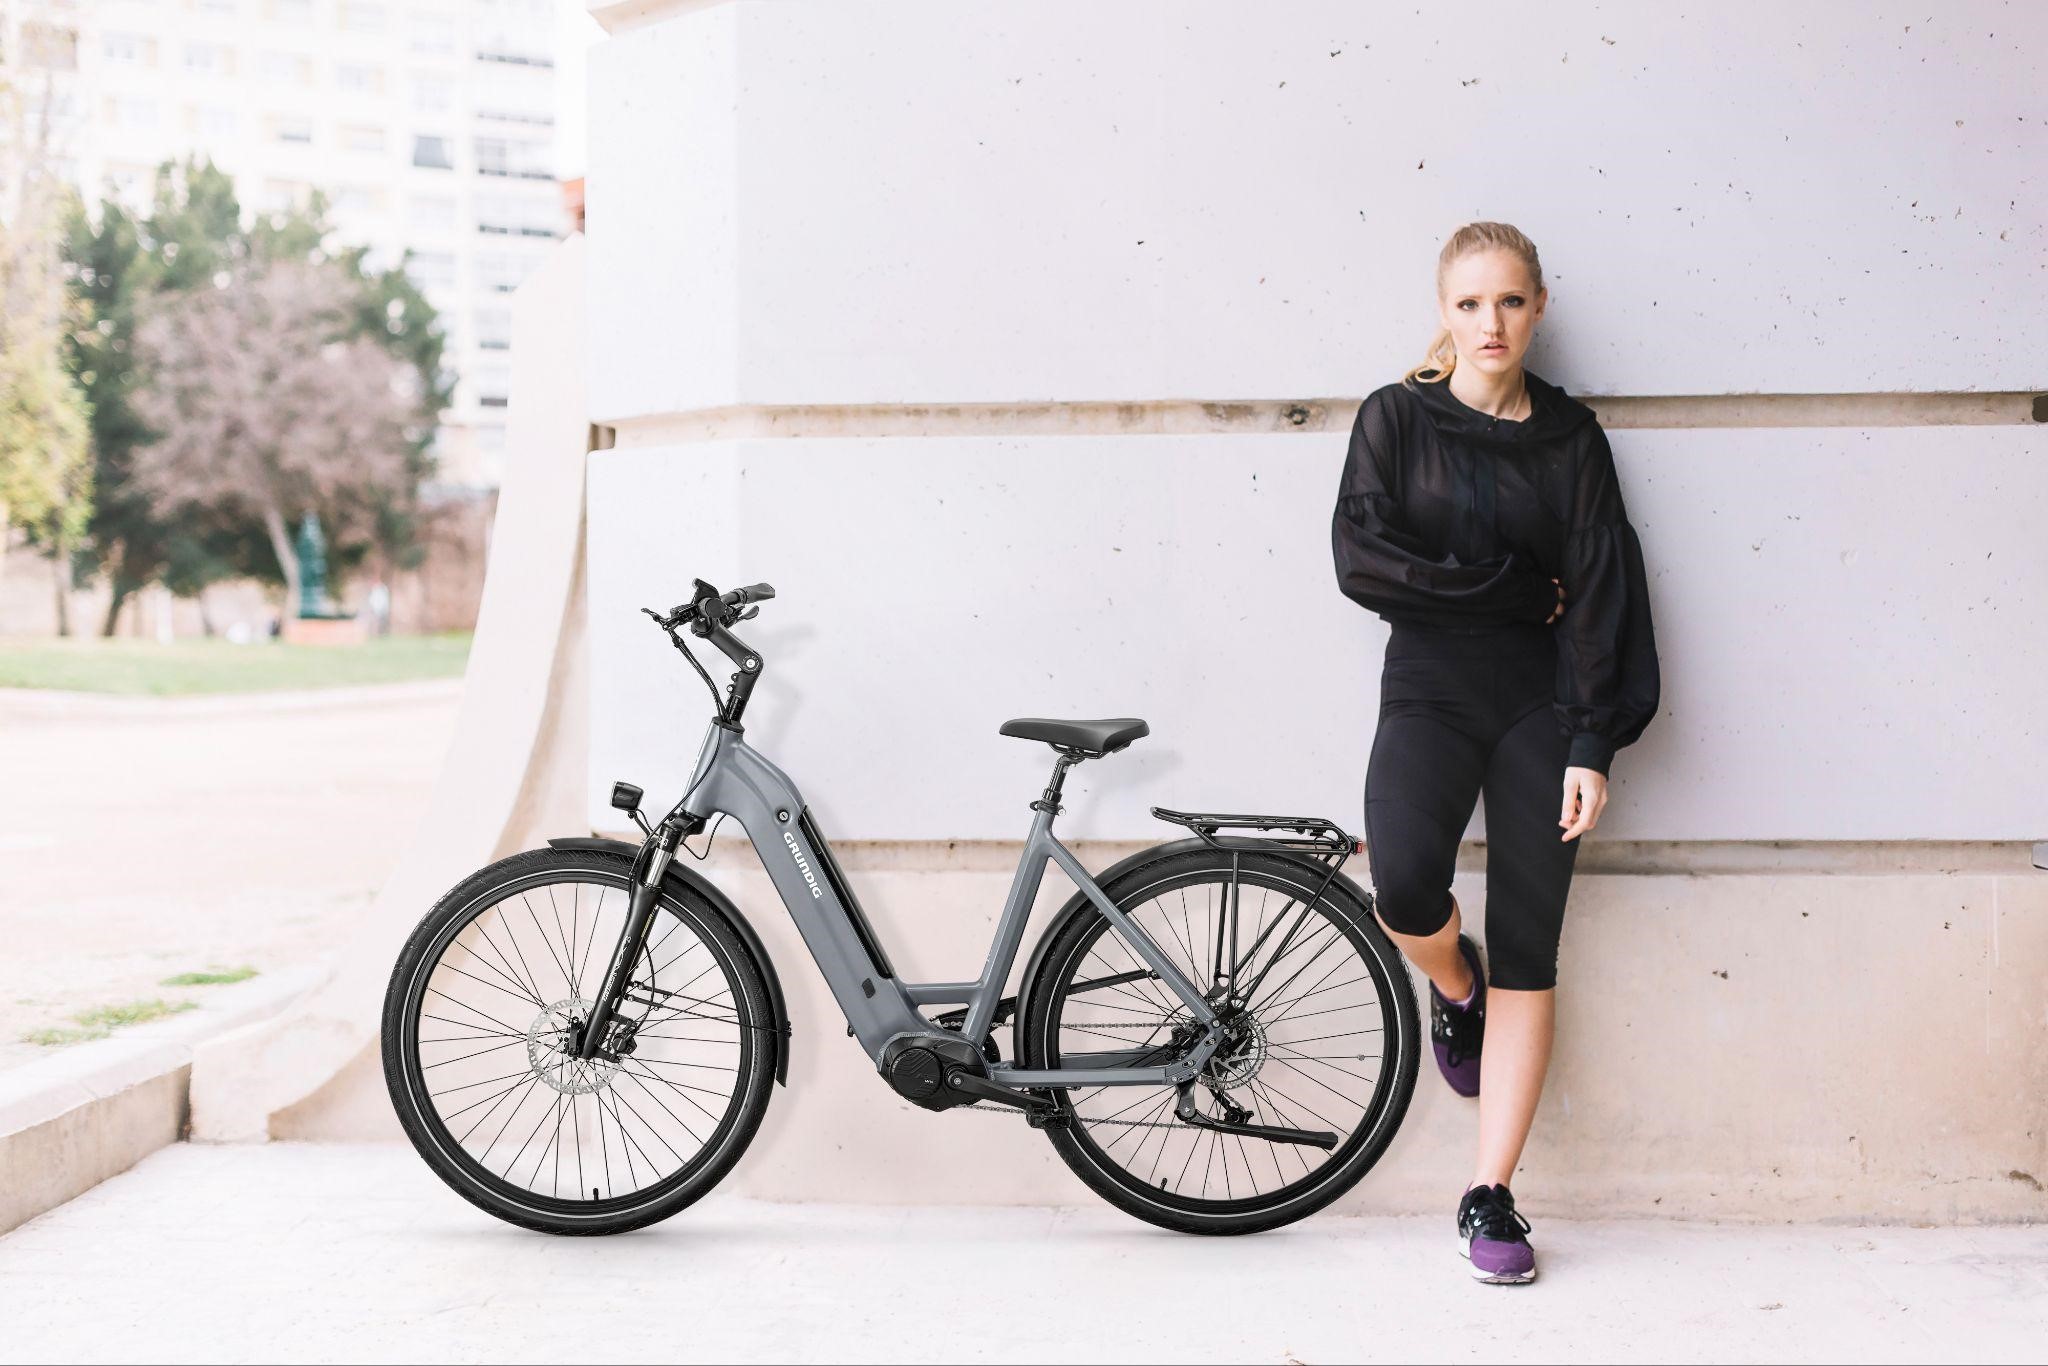 An image of a woman in workout clothes next to her e-bike.